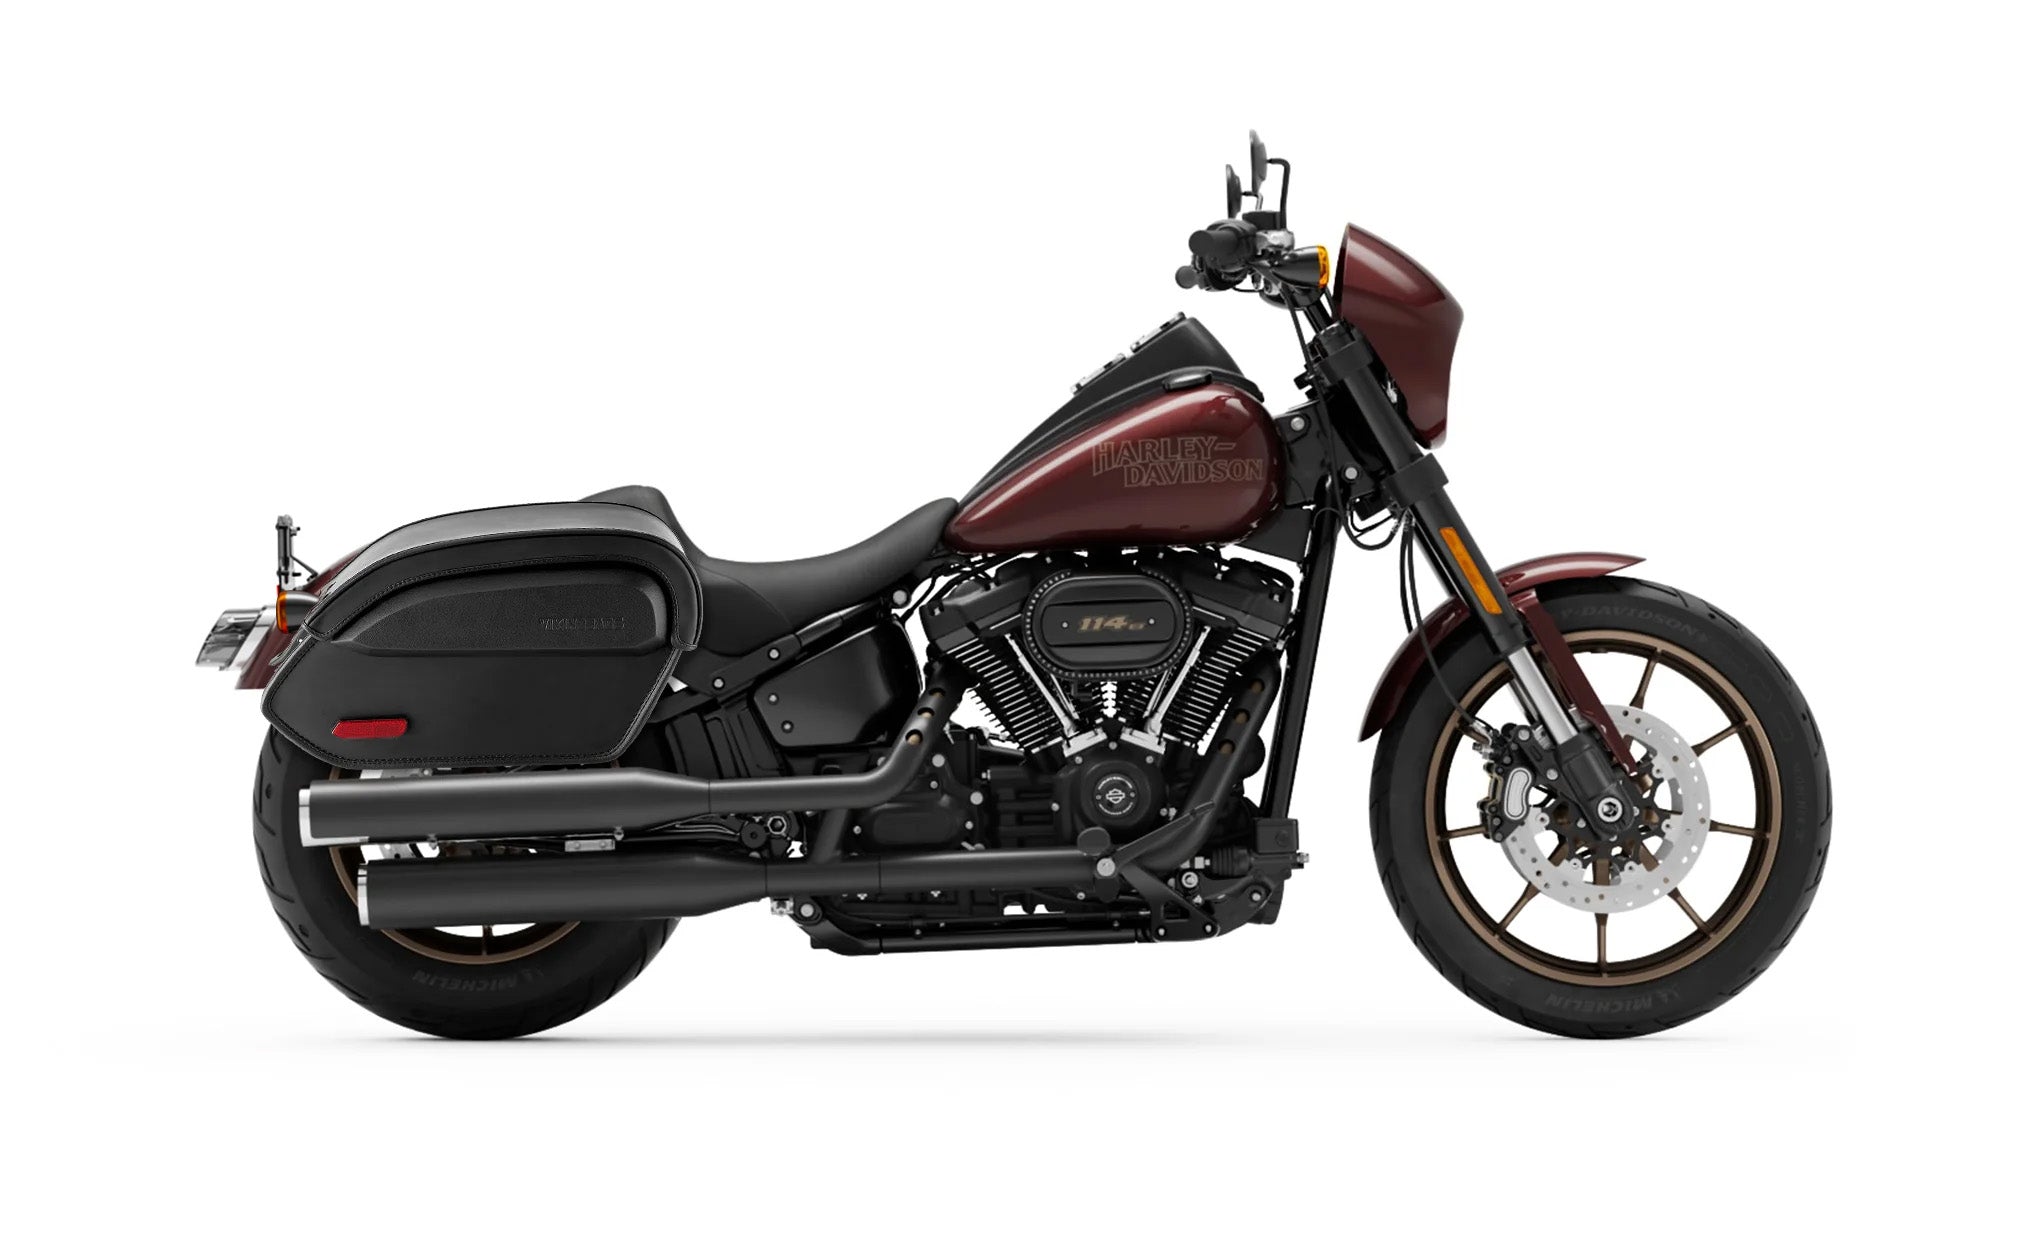 Viking Aviator Large Leather Motorcycle Saddlebags For Harley Softail Low Rider S Fxlrs on Bike Photo @expand